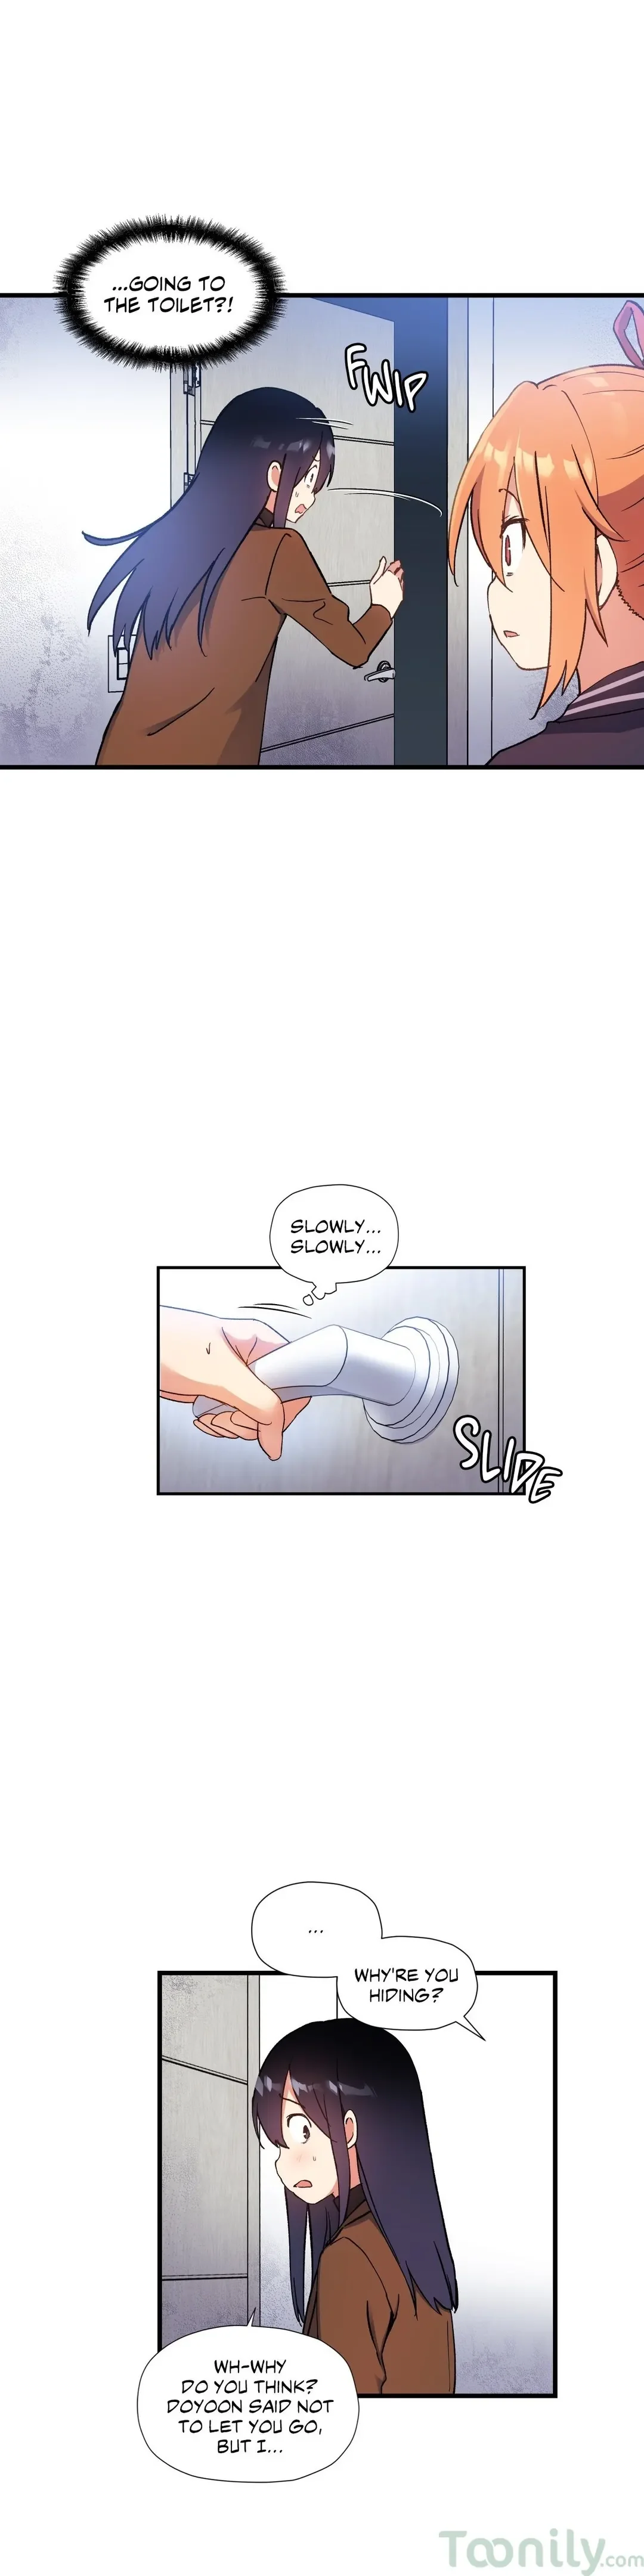 under-observation-my-first-loves-and-i-chap-41-1